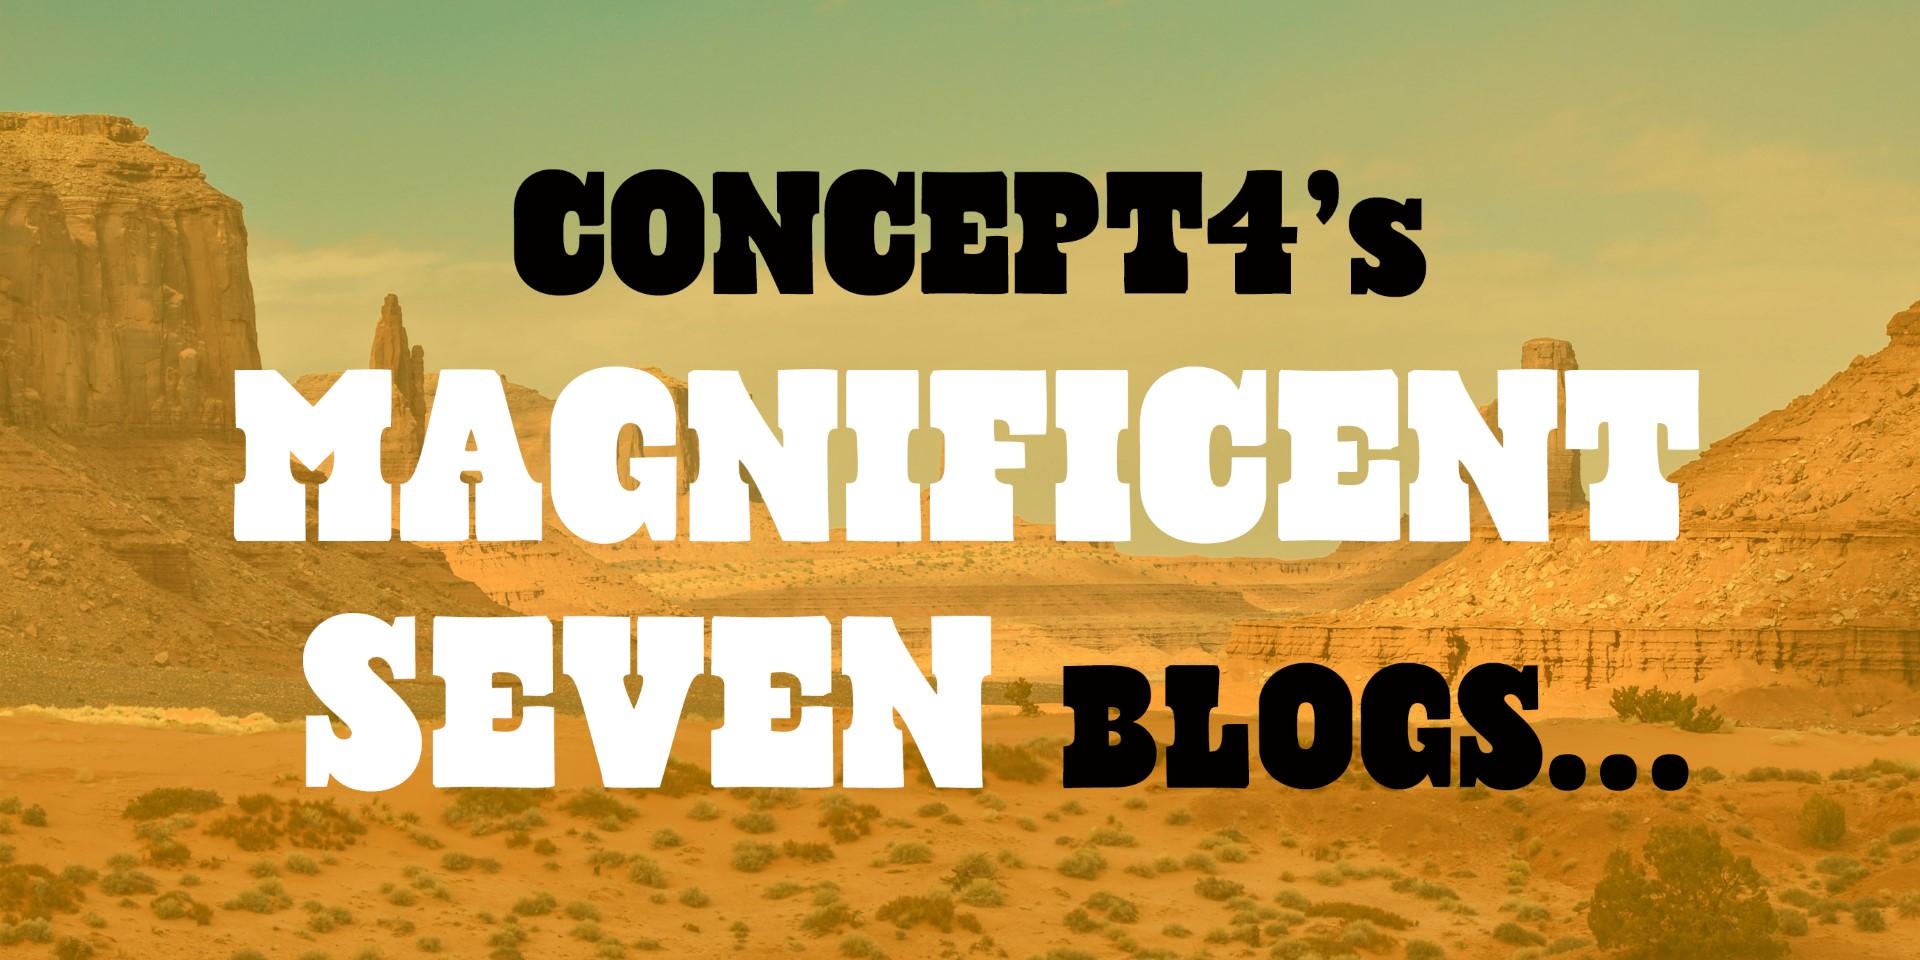 Concept4's Magnificent Seven - Our Most Popular Blogs According To Google